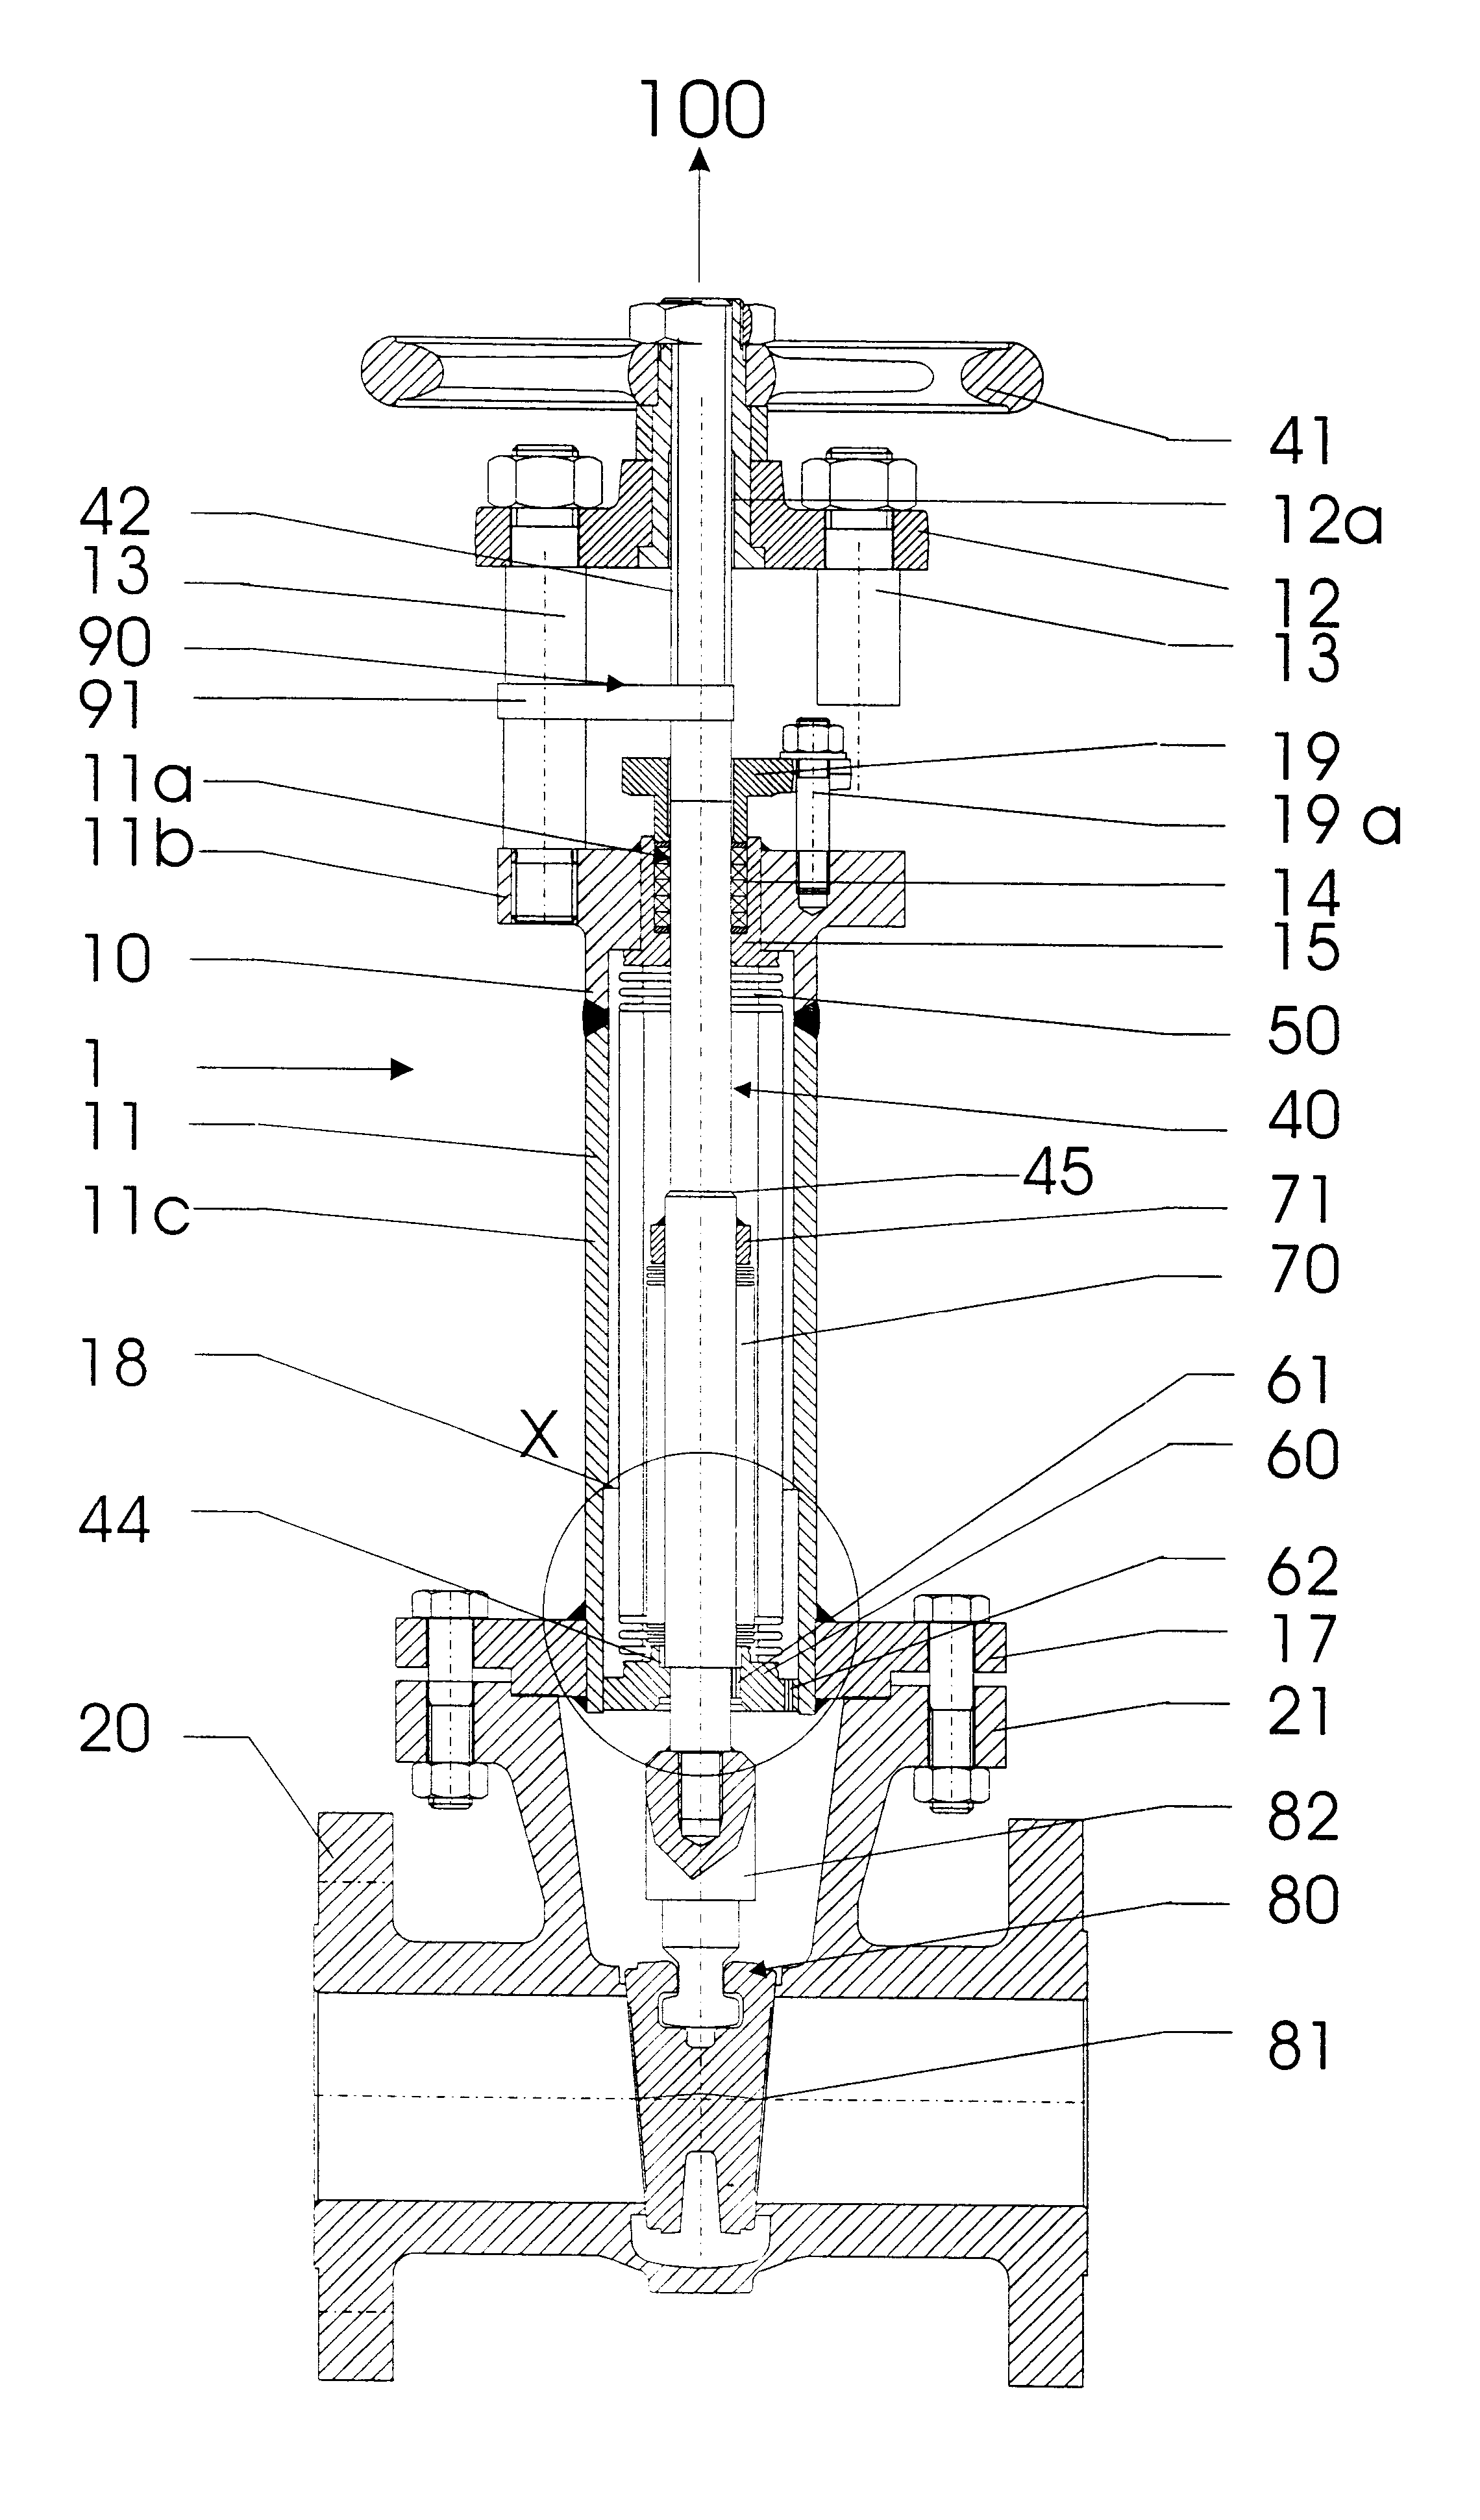 Shut-off device for pipes